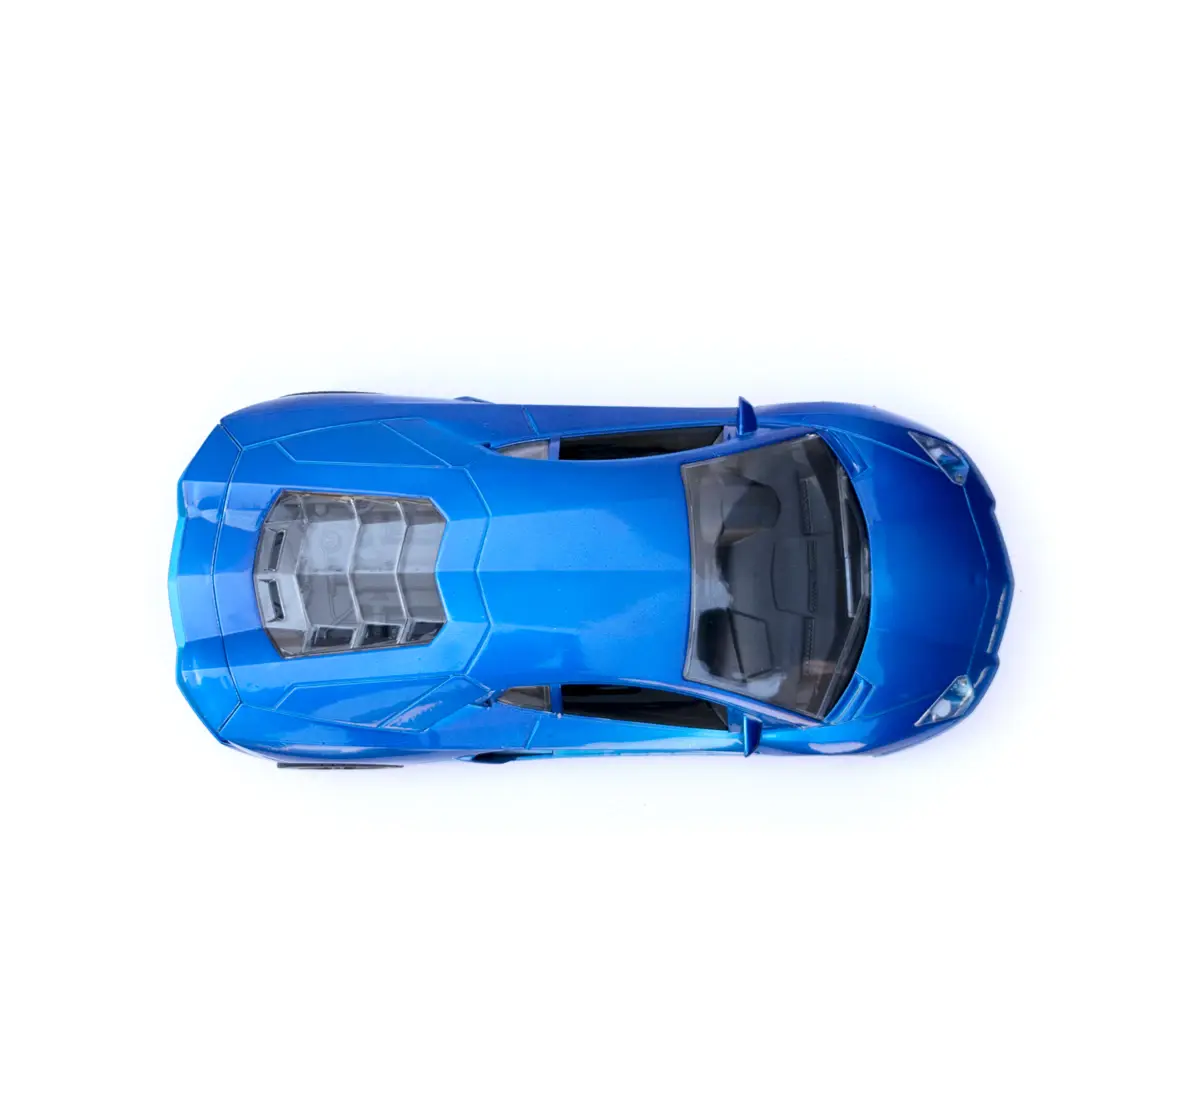 Seedo Electric Remote Controlled Luxurious Sports Racing Car For Kids of Age 4Y+, Blue, Blue